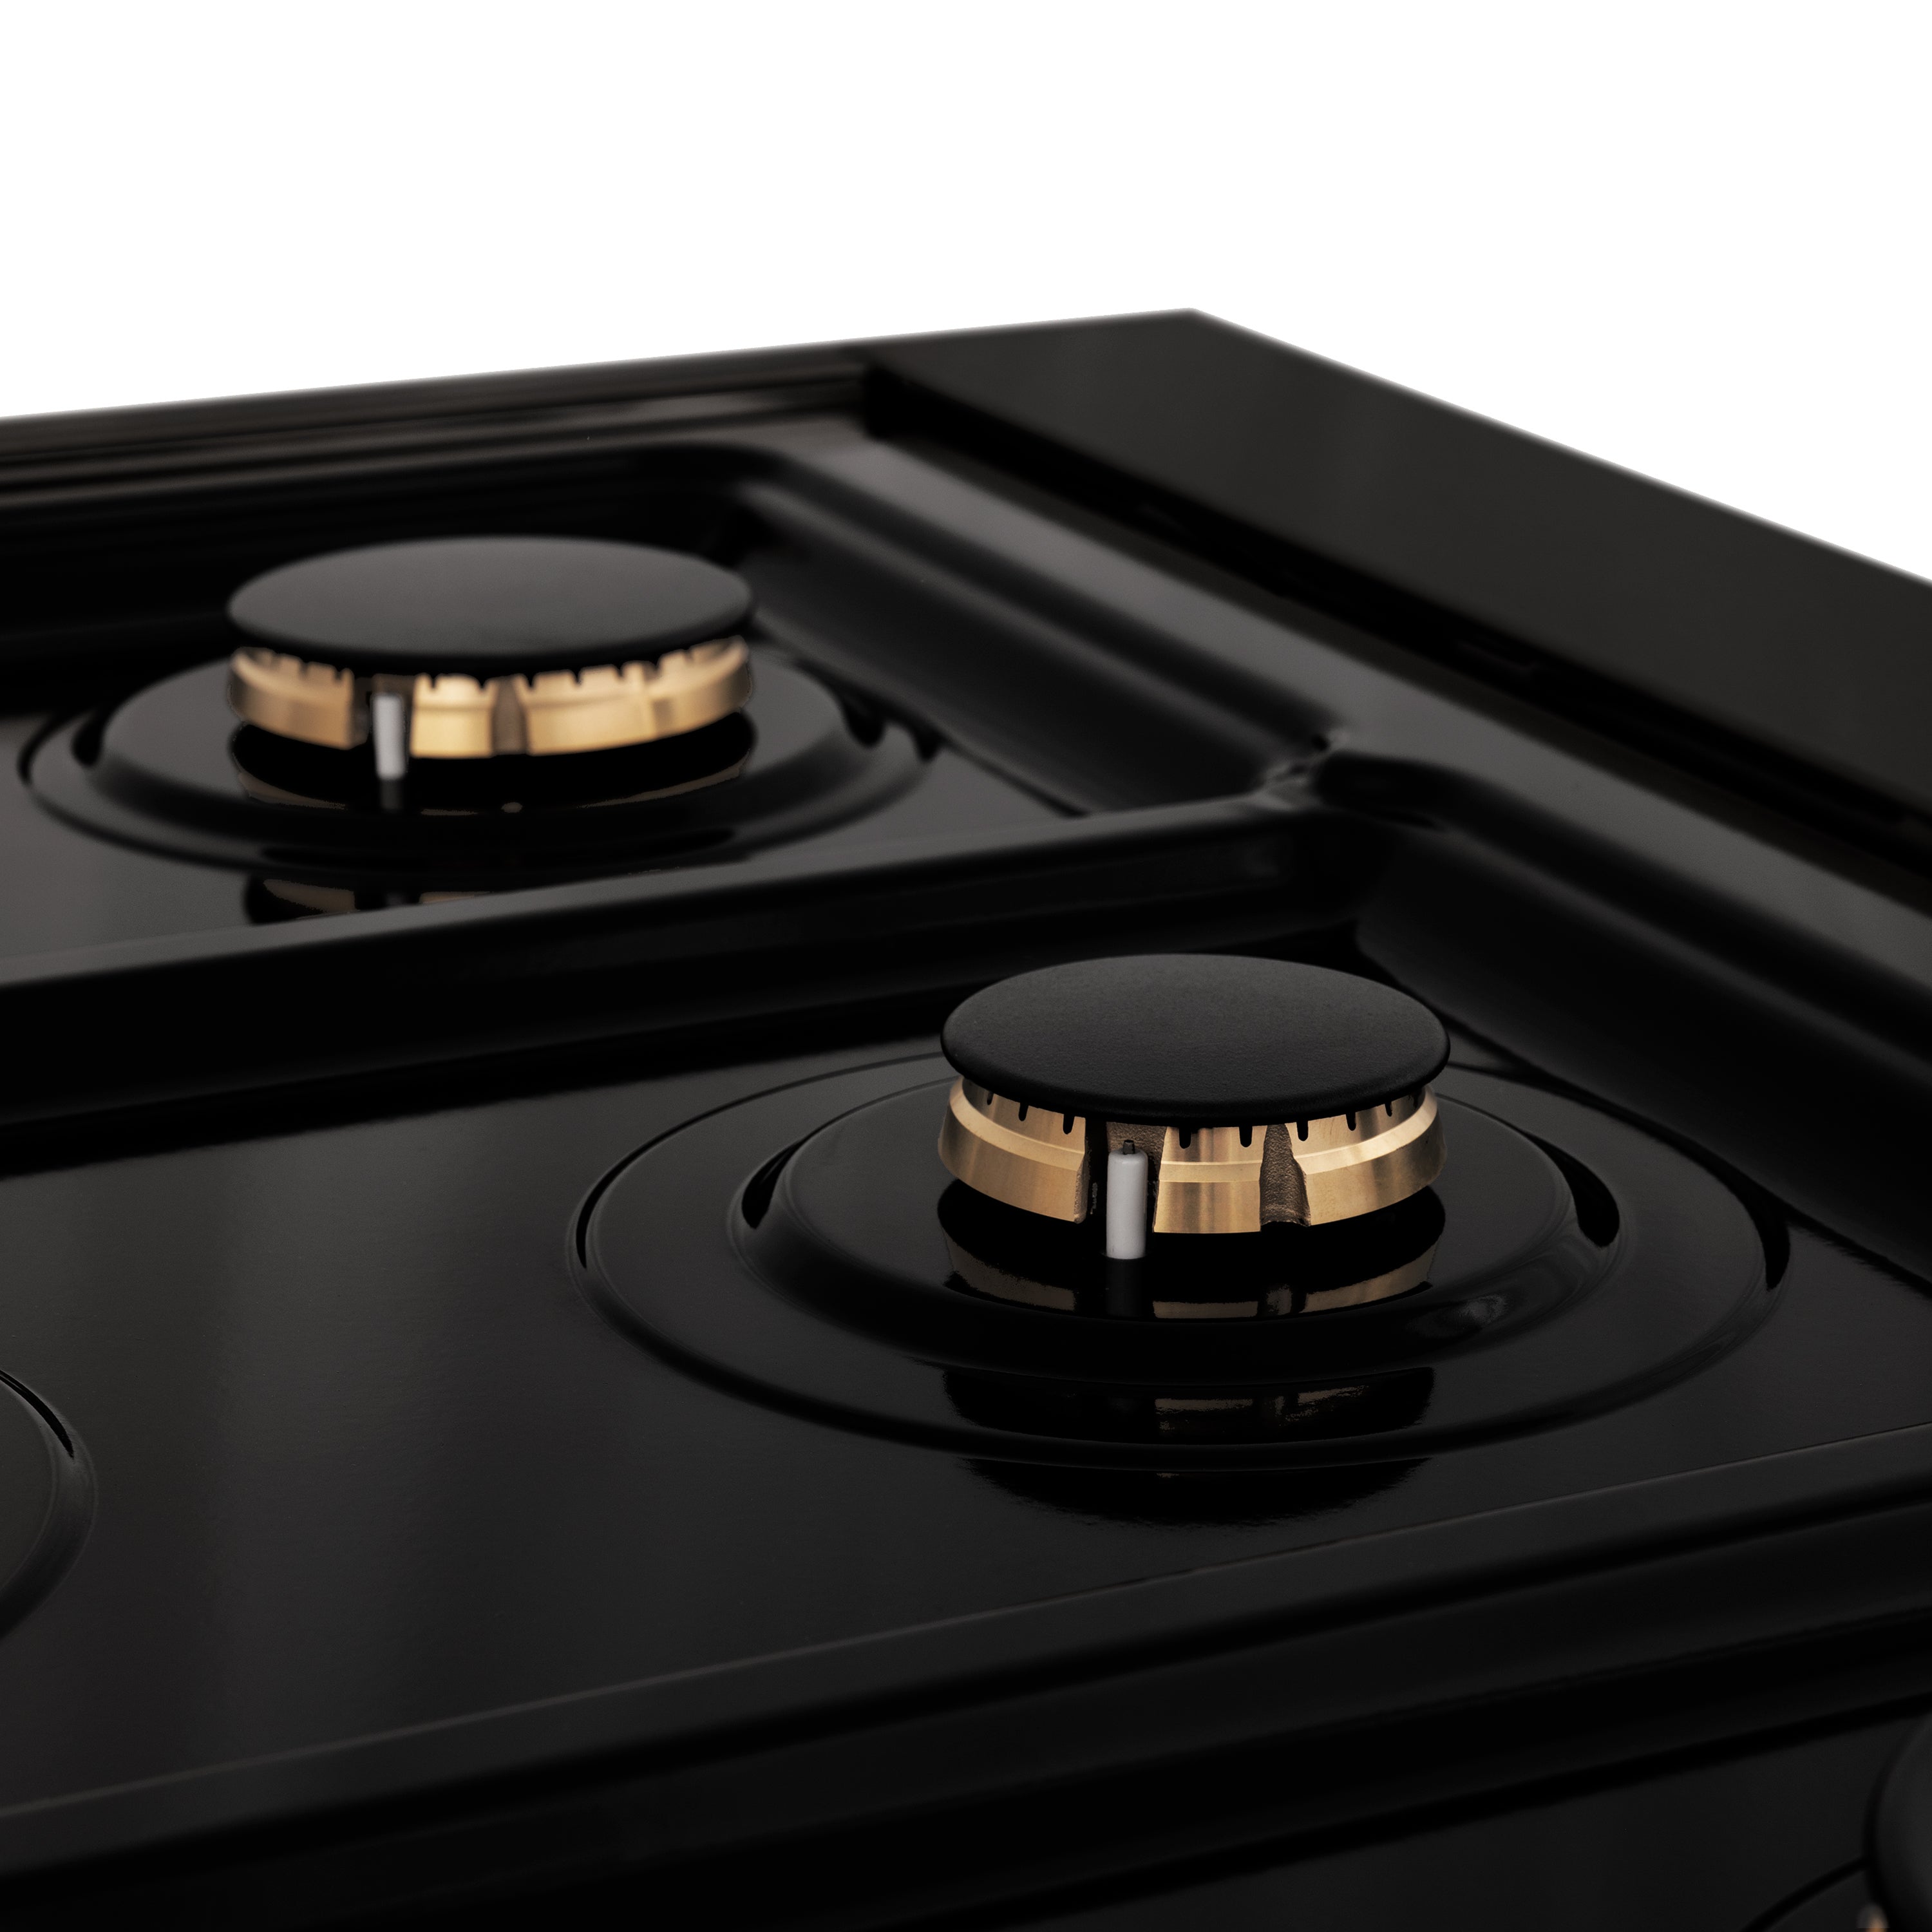 ZLINE 48" Porcelain Gas Stovetop in Black Stainless Steel with 7 Gas Brass Burners and Griddle (RTB-48)